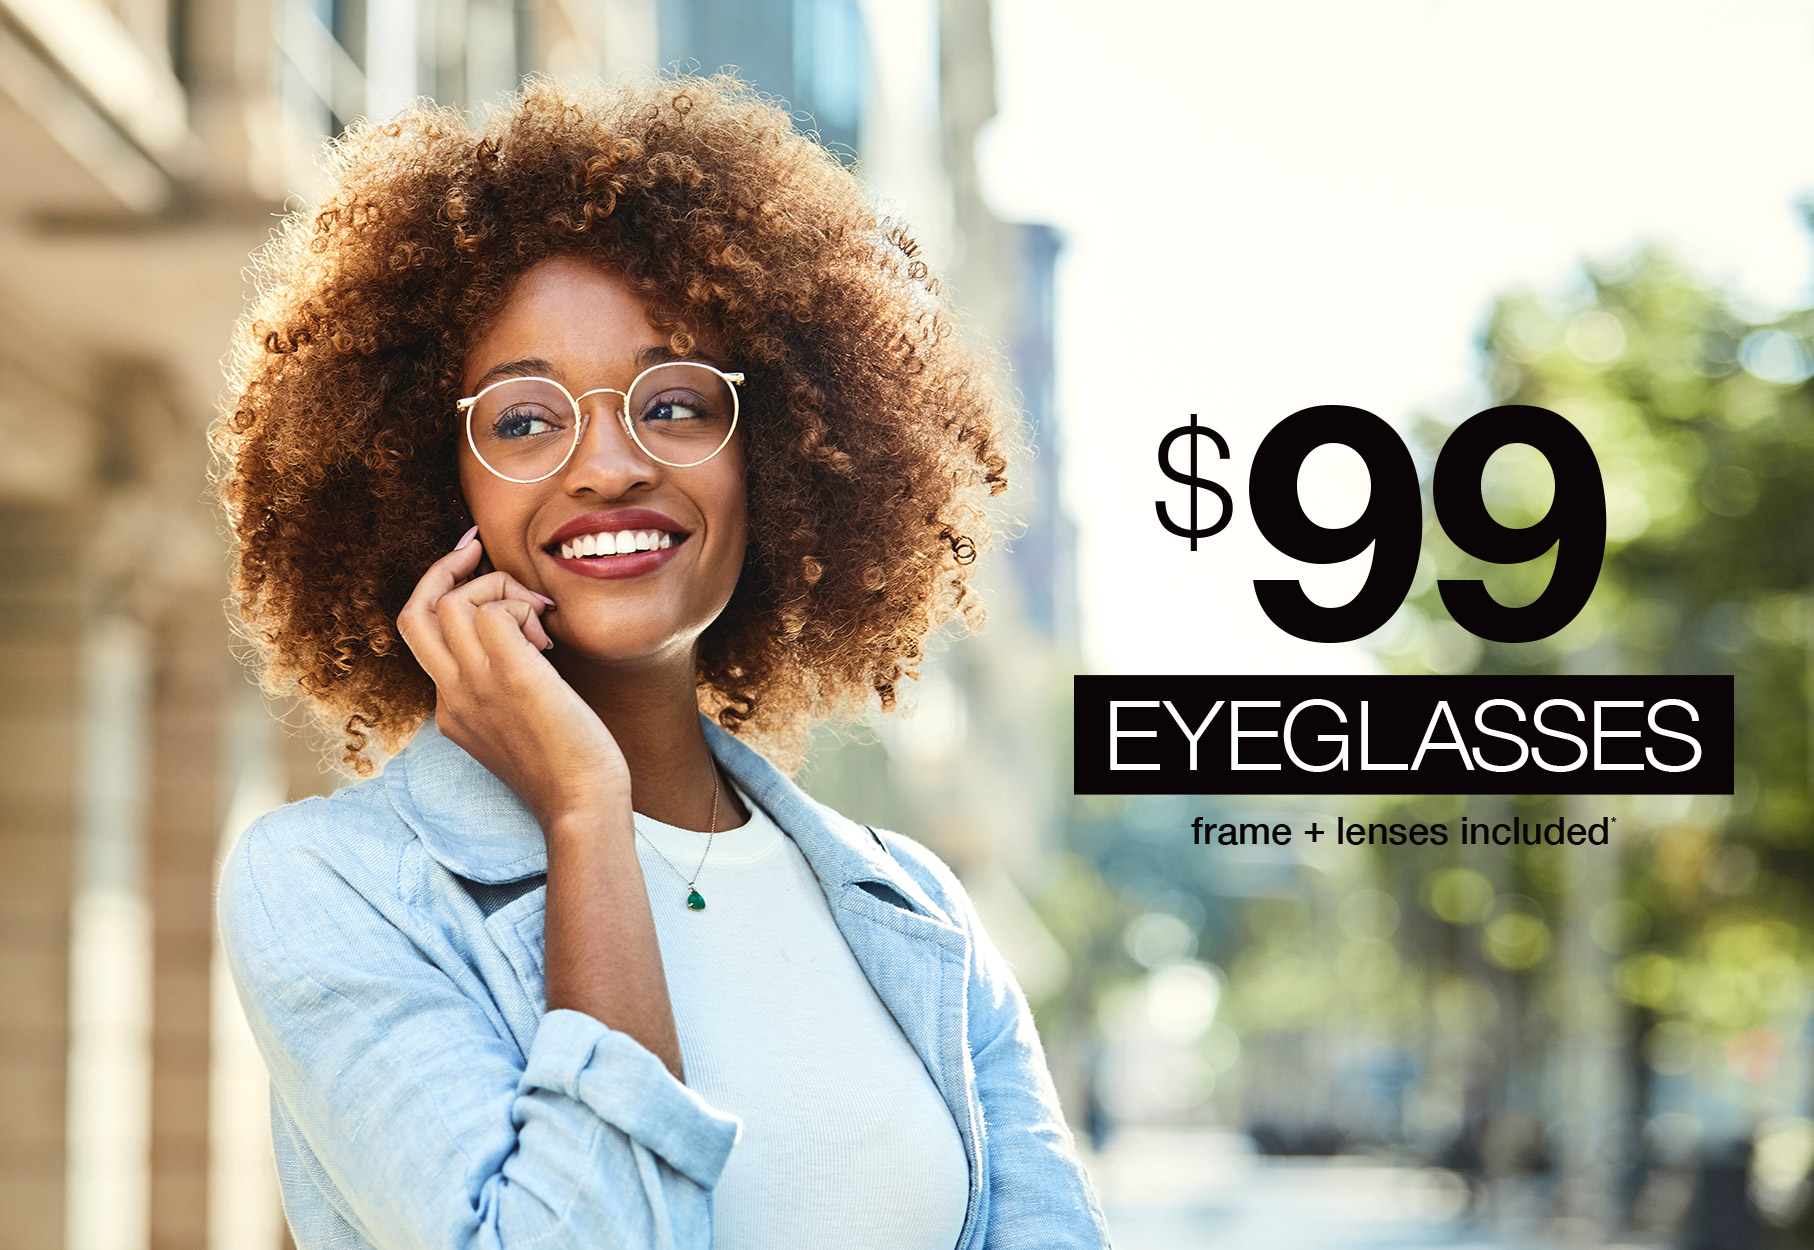 Text: $99 Eyeglasses frame + lenses included* Photo: Smiling woman wearing eyeglasses and holding a cell phone to her ear.